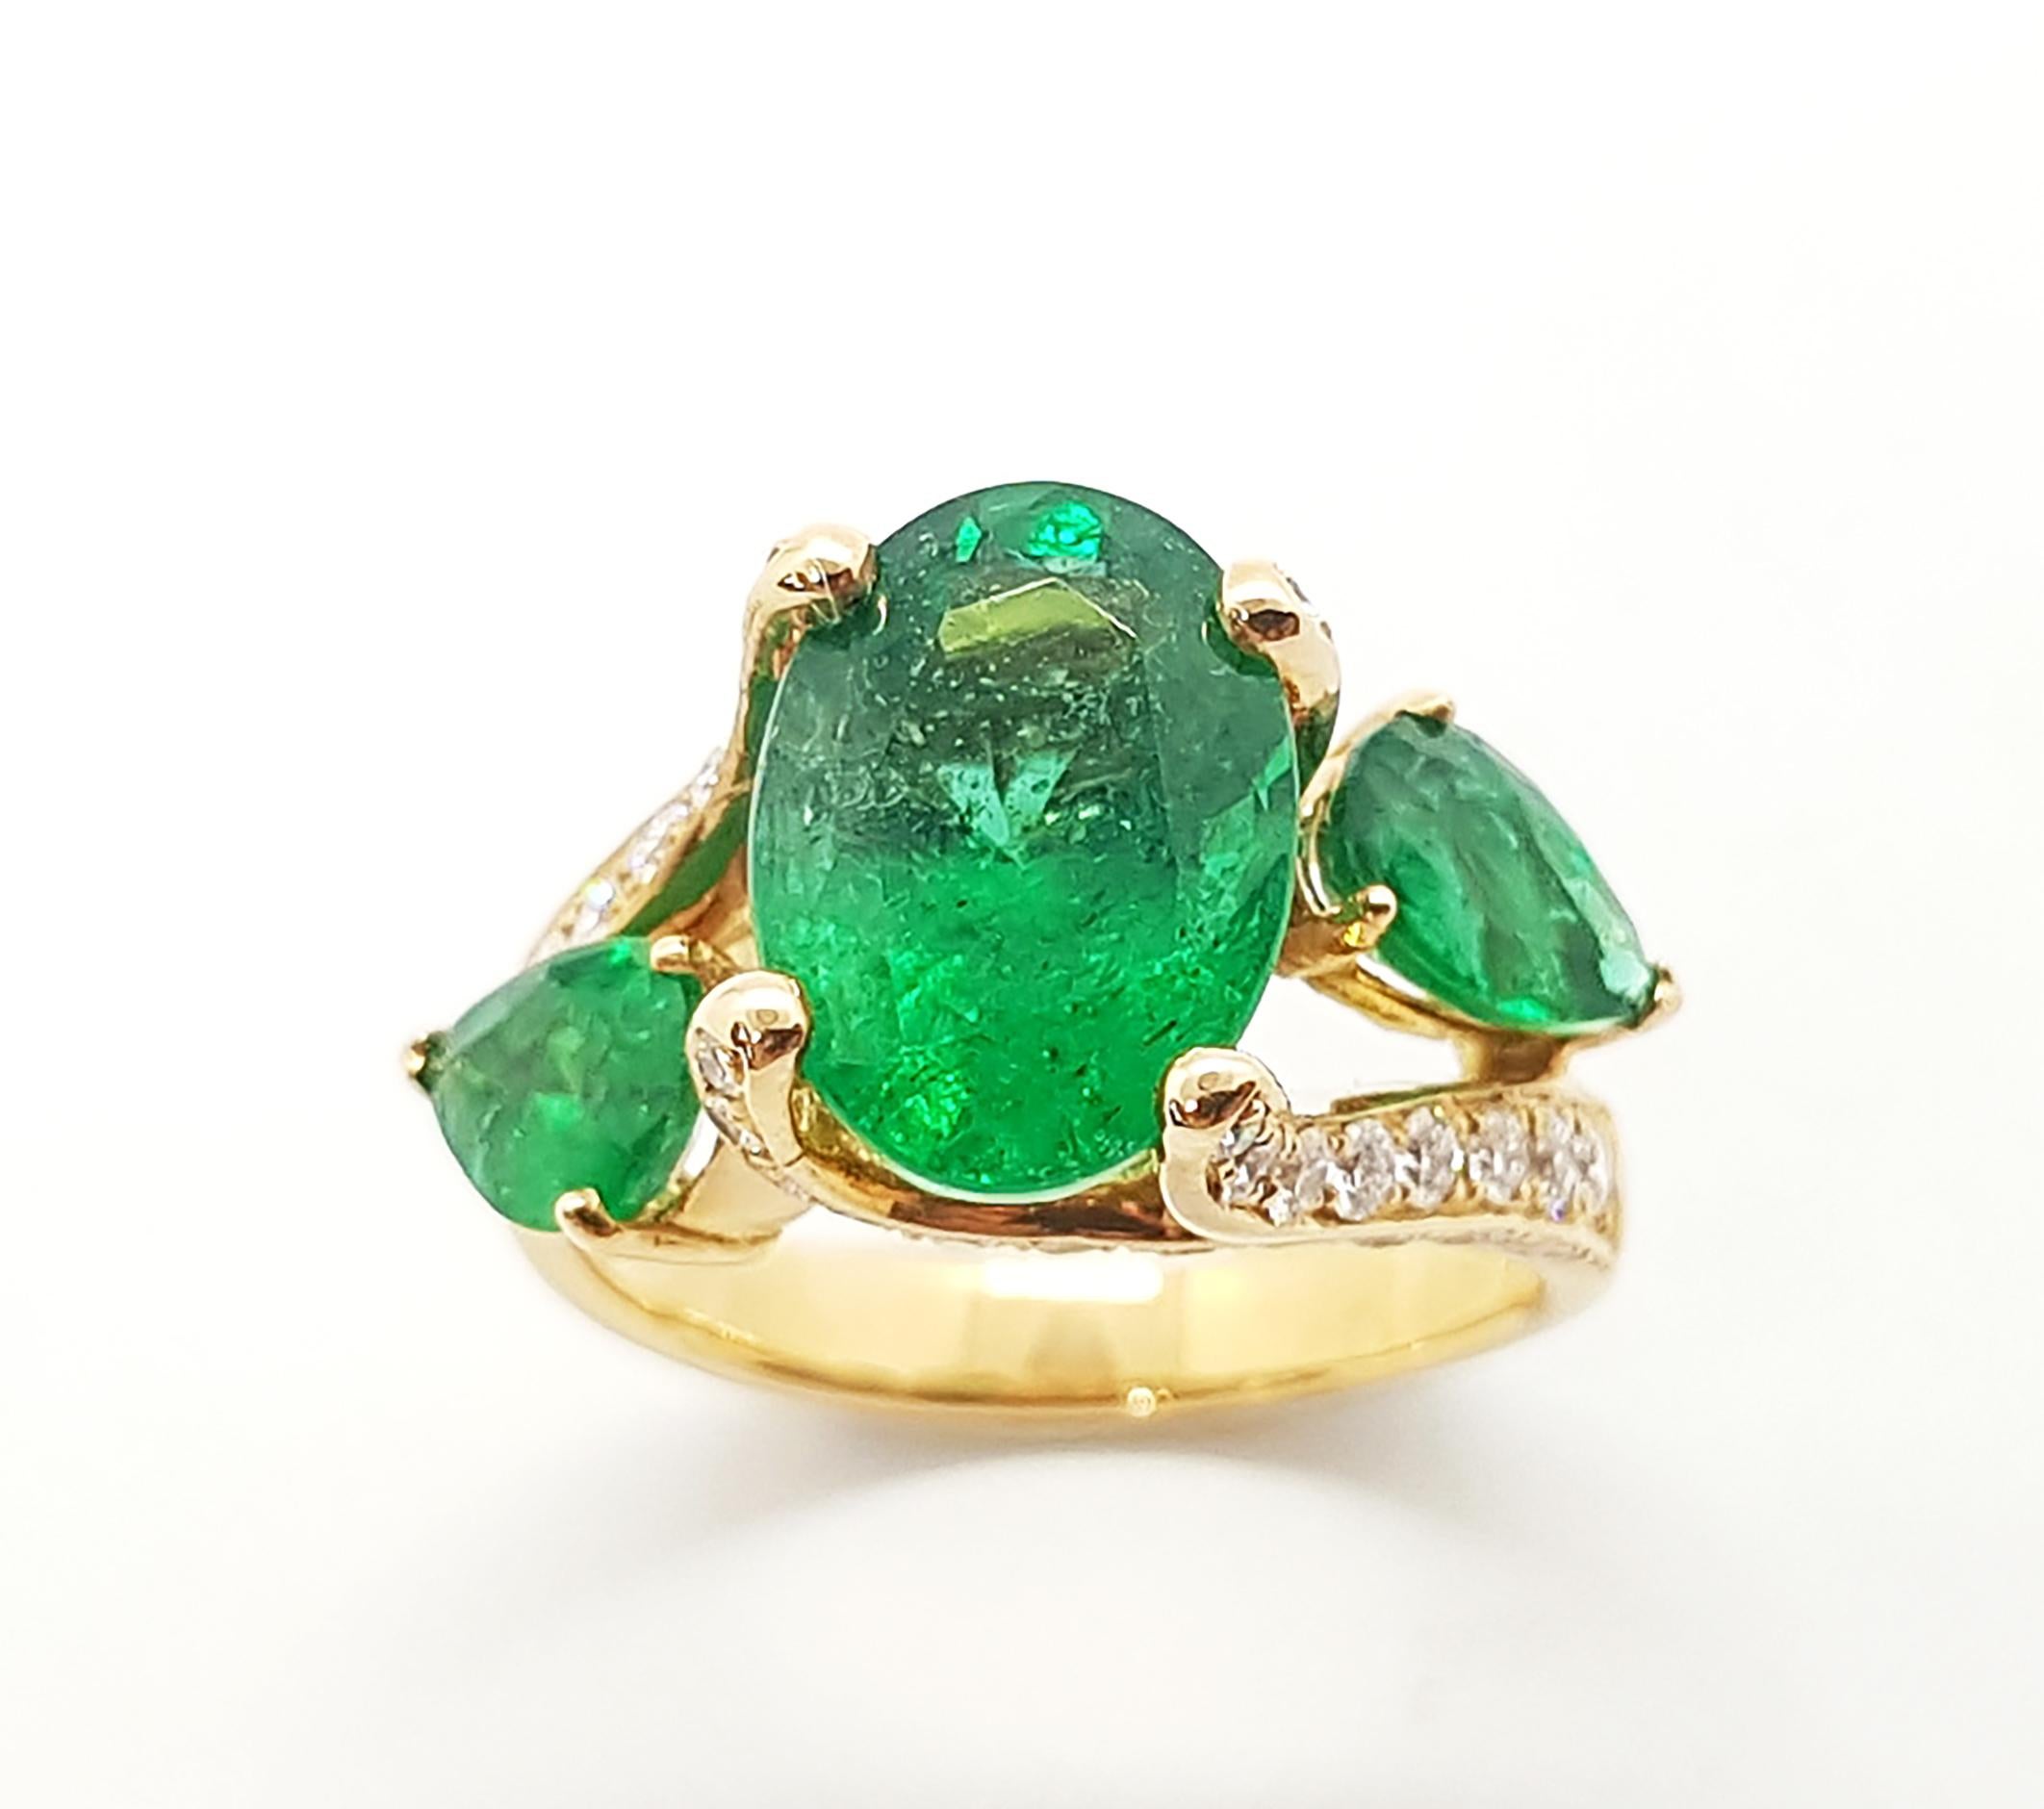 Emerald 3.07 carats with Emerald 1.03  carats and Diamond 0.43 carat Ring set in 18 Karat Rose Gold Settings

Width:  2.1 cm 
Length:  1.2 cm
Ring Size: 50
Total Weight: 5.39 grams

